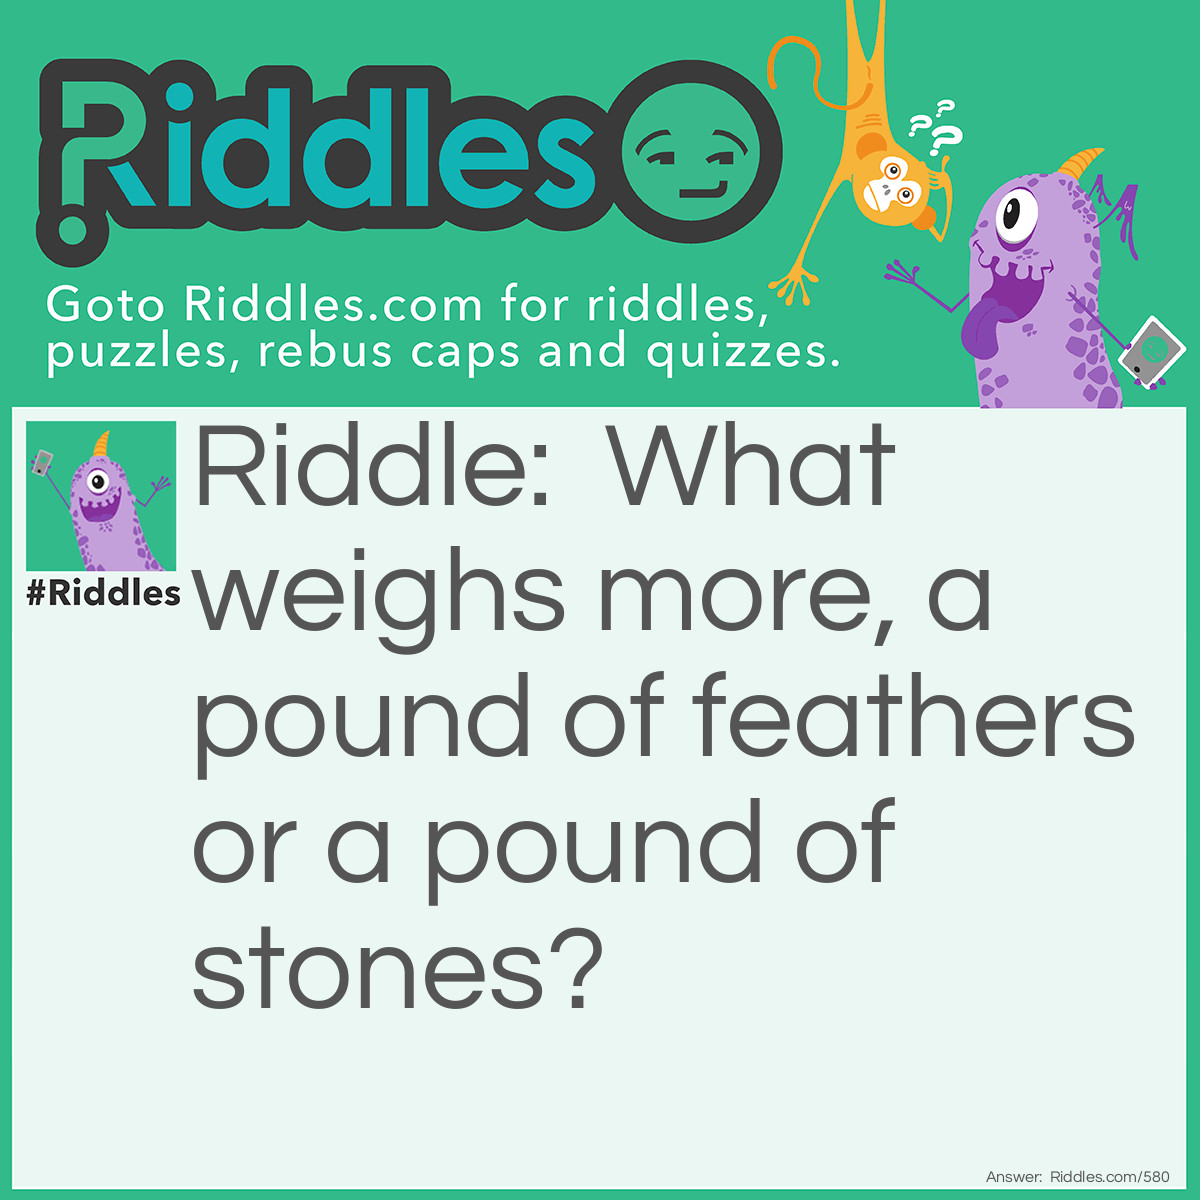 Riddle: What weighs more? A pound of <a href="https://www.riddles.com/post/50/chicken-riddles">feathers</a> or a pound of stones? Answer: The same. They both weigh a pound!